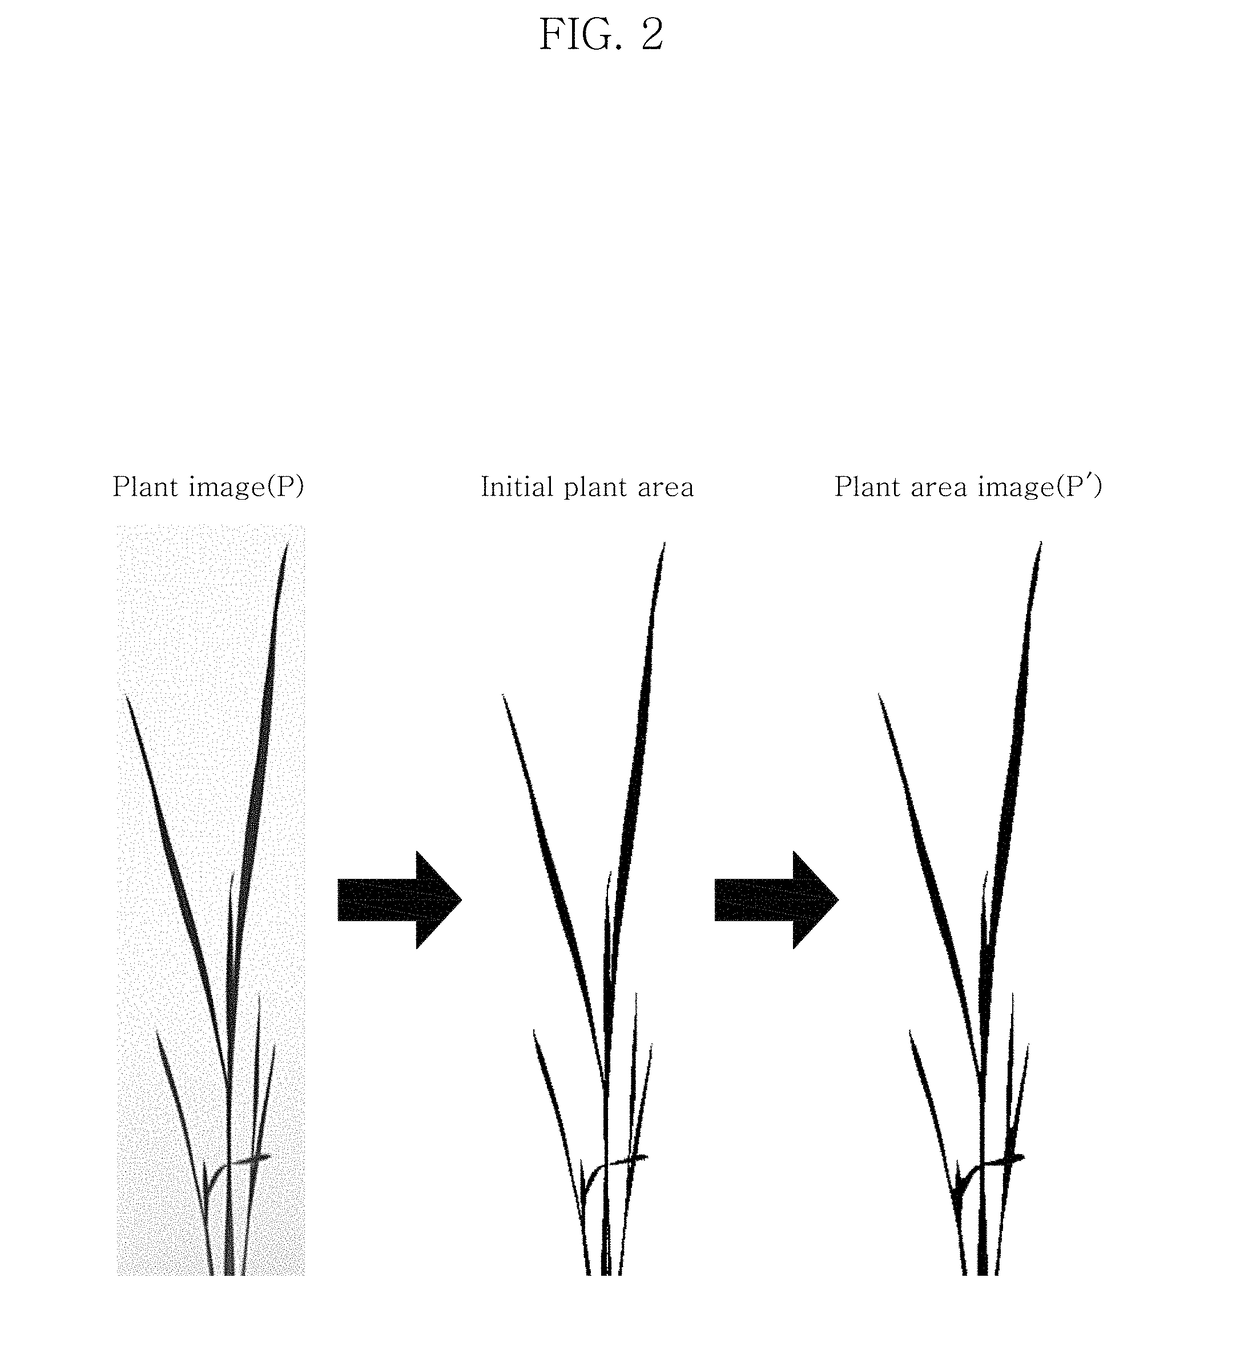 System and method for plant leaf identification